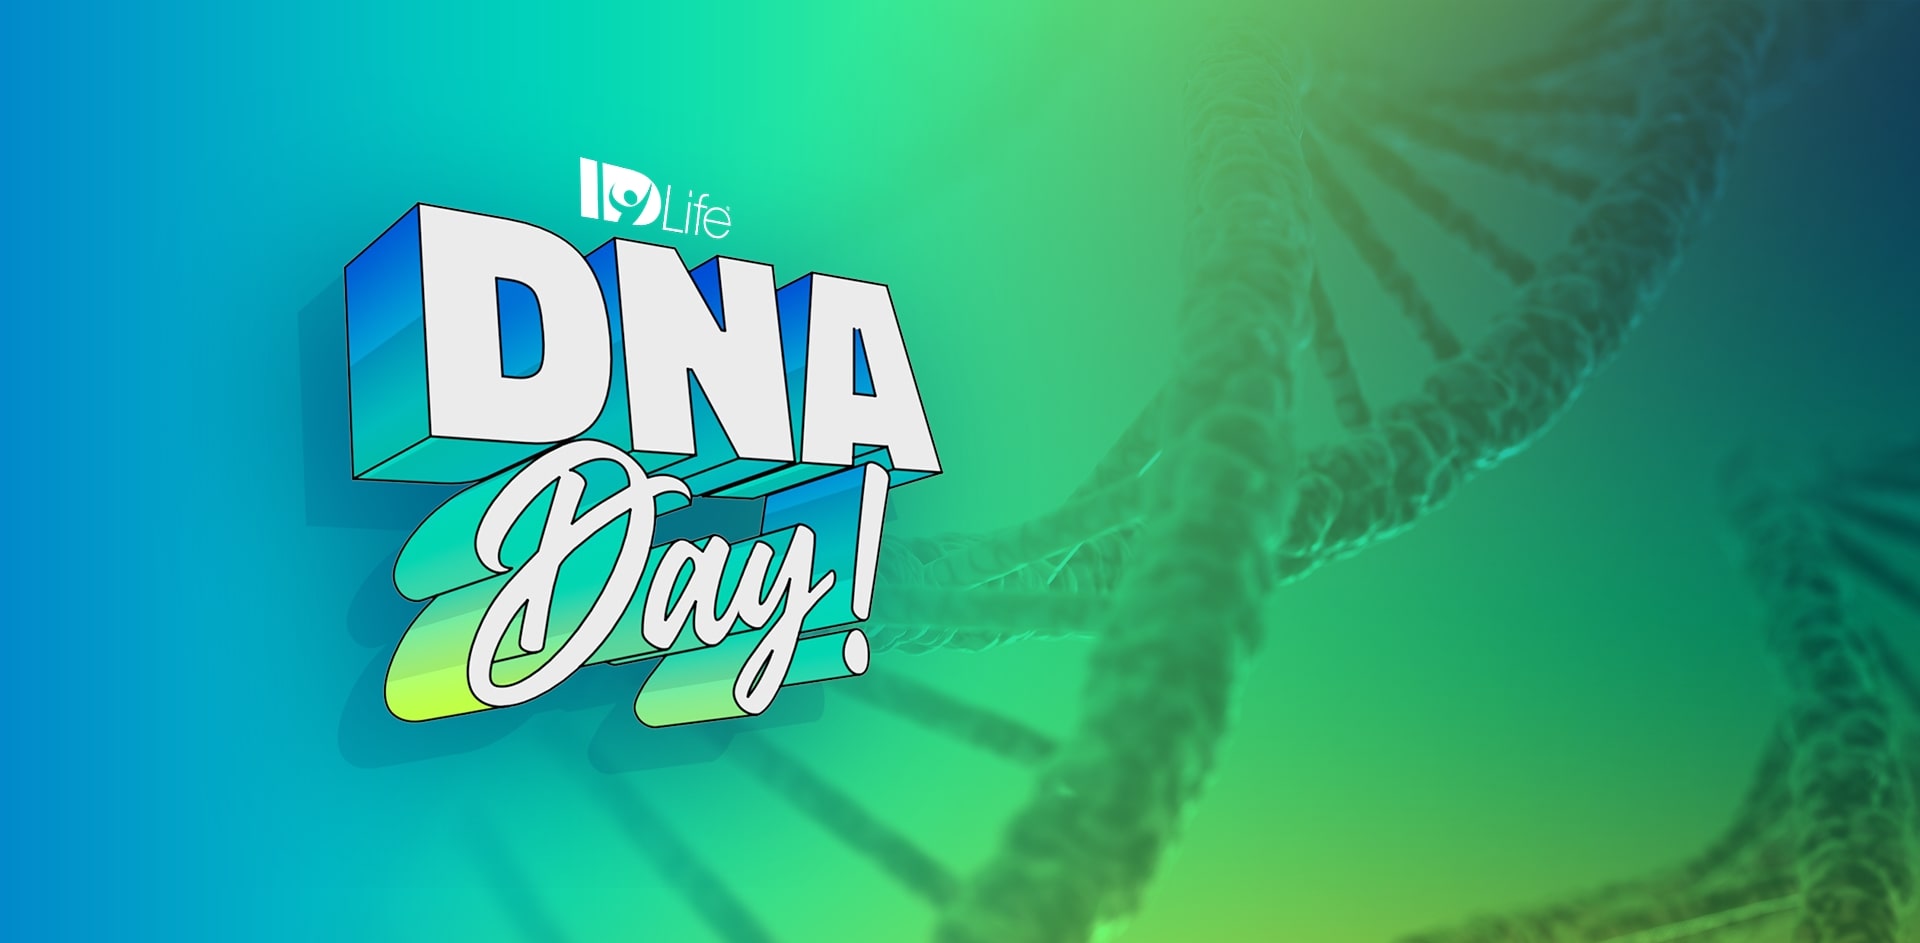 DNA Day